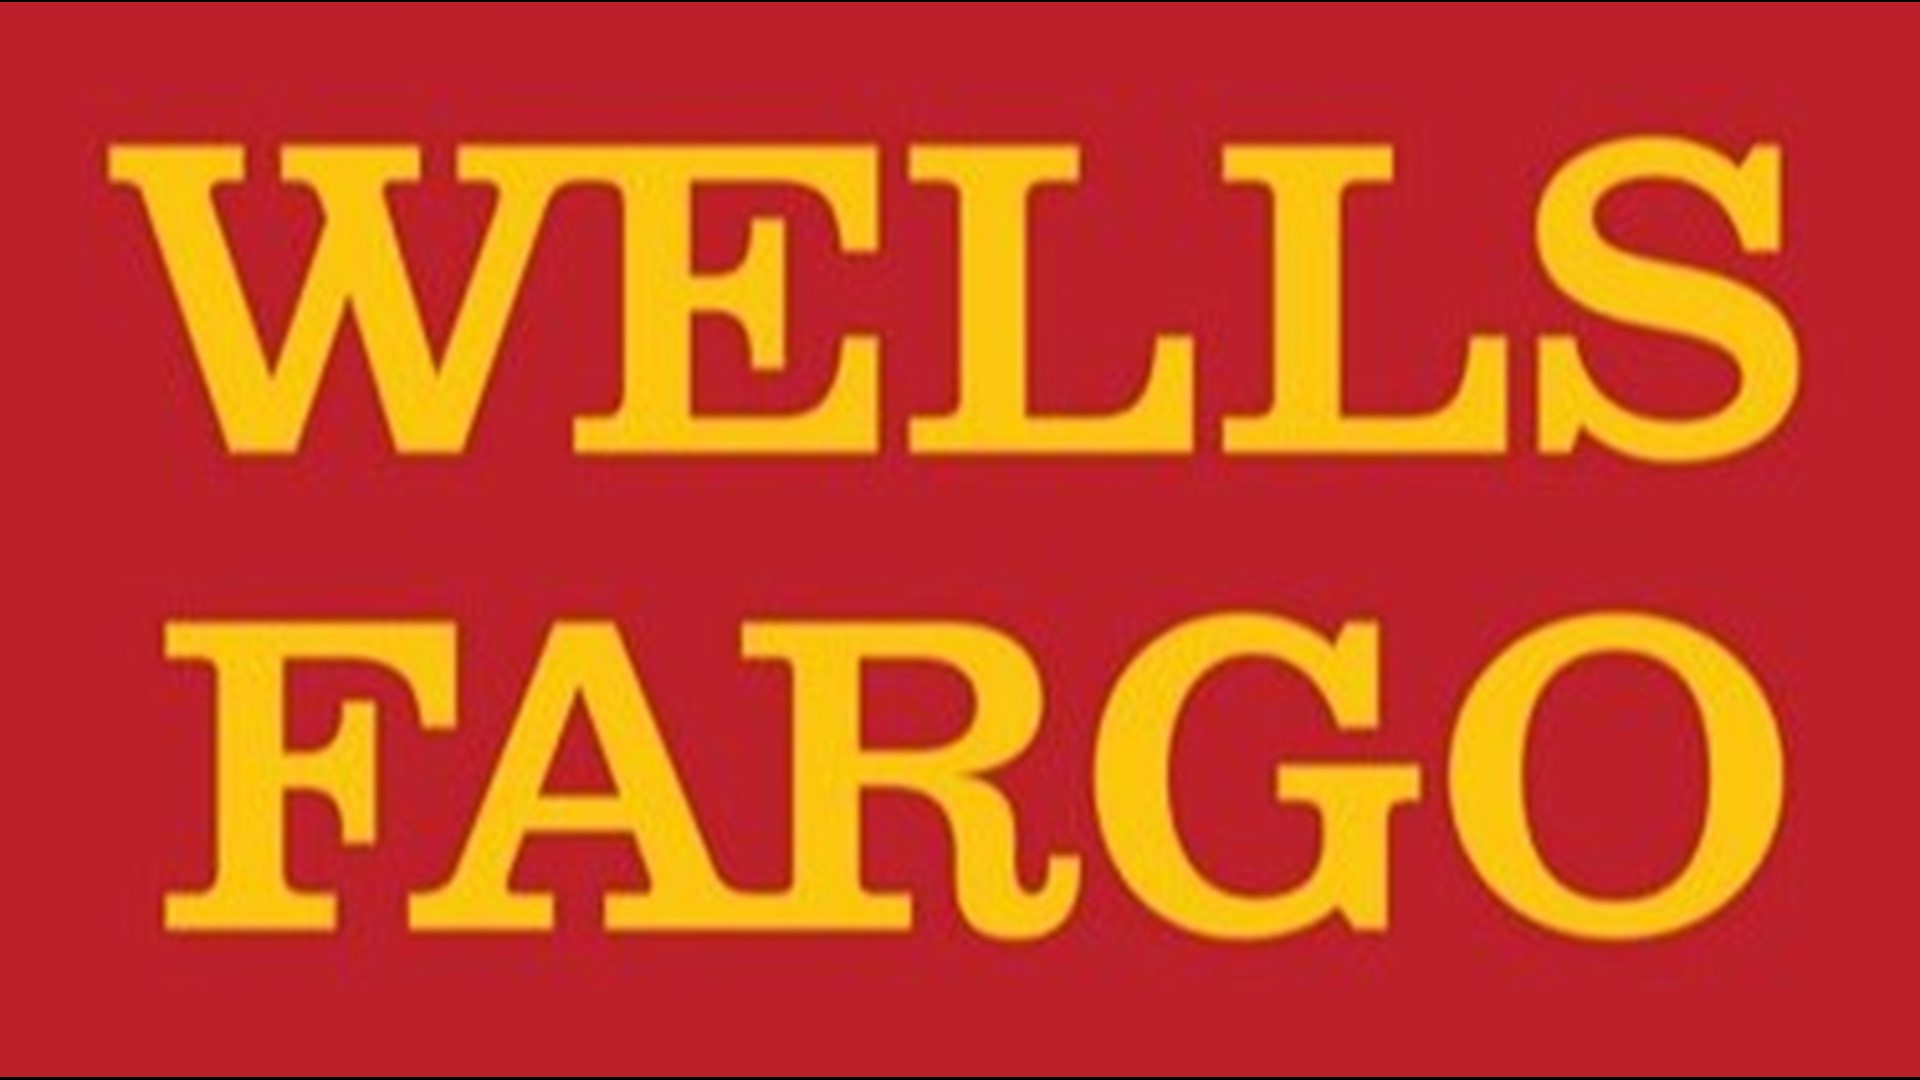 Many Wells Fargo customers checking for stimulus checks Wednesday morning were instead met with issues accessing their online banking.